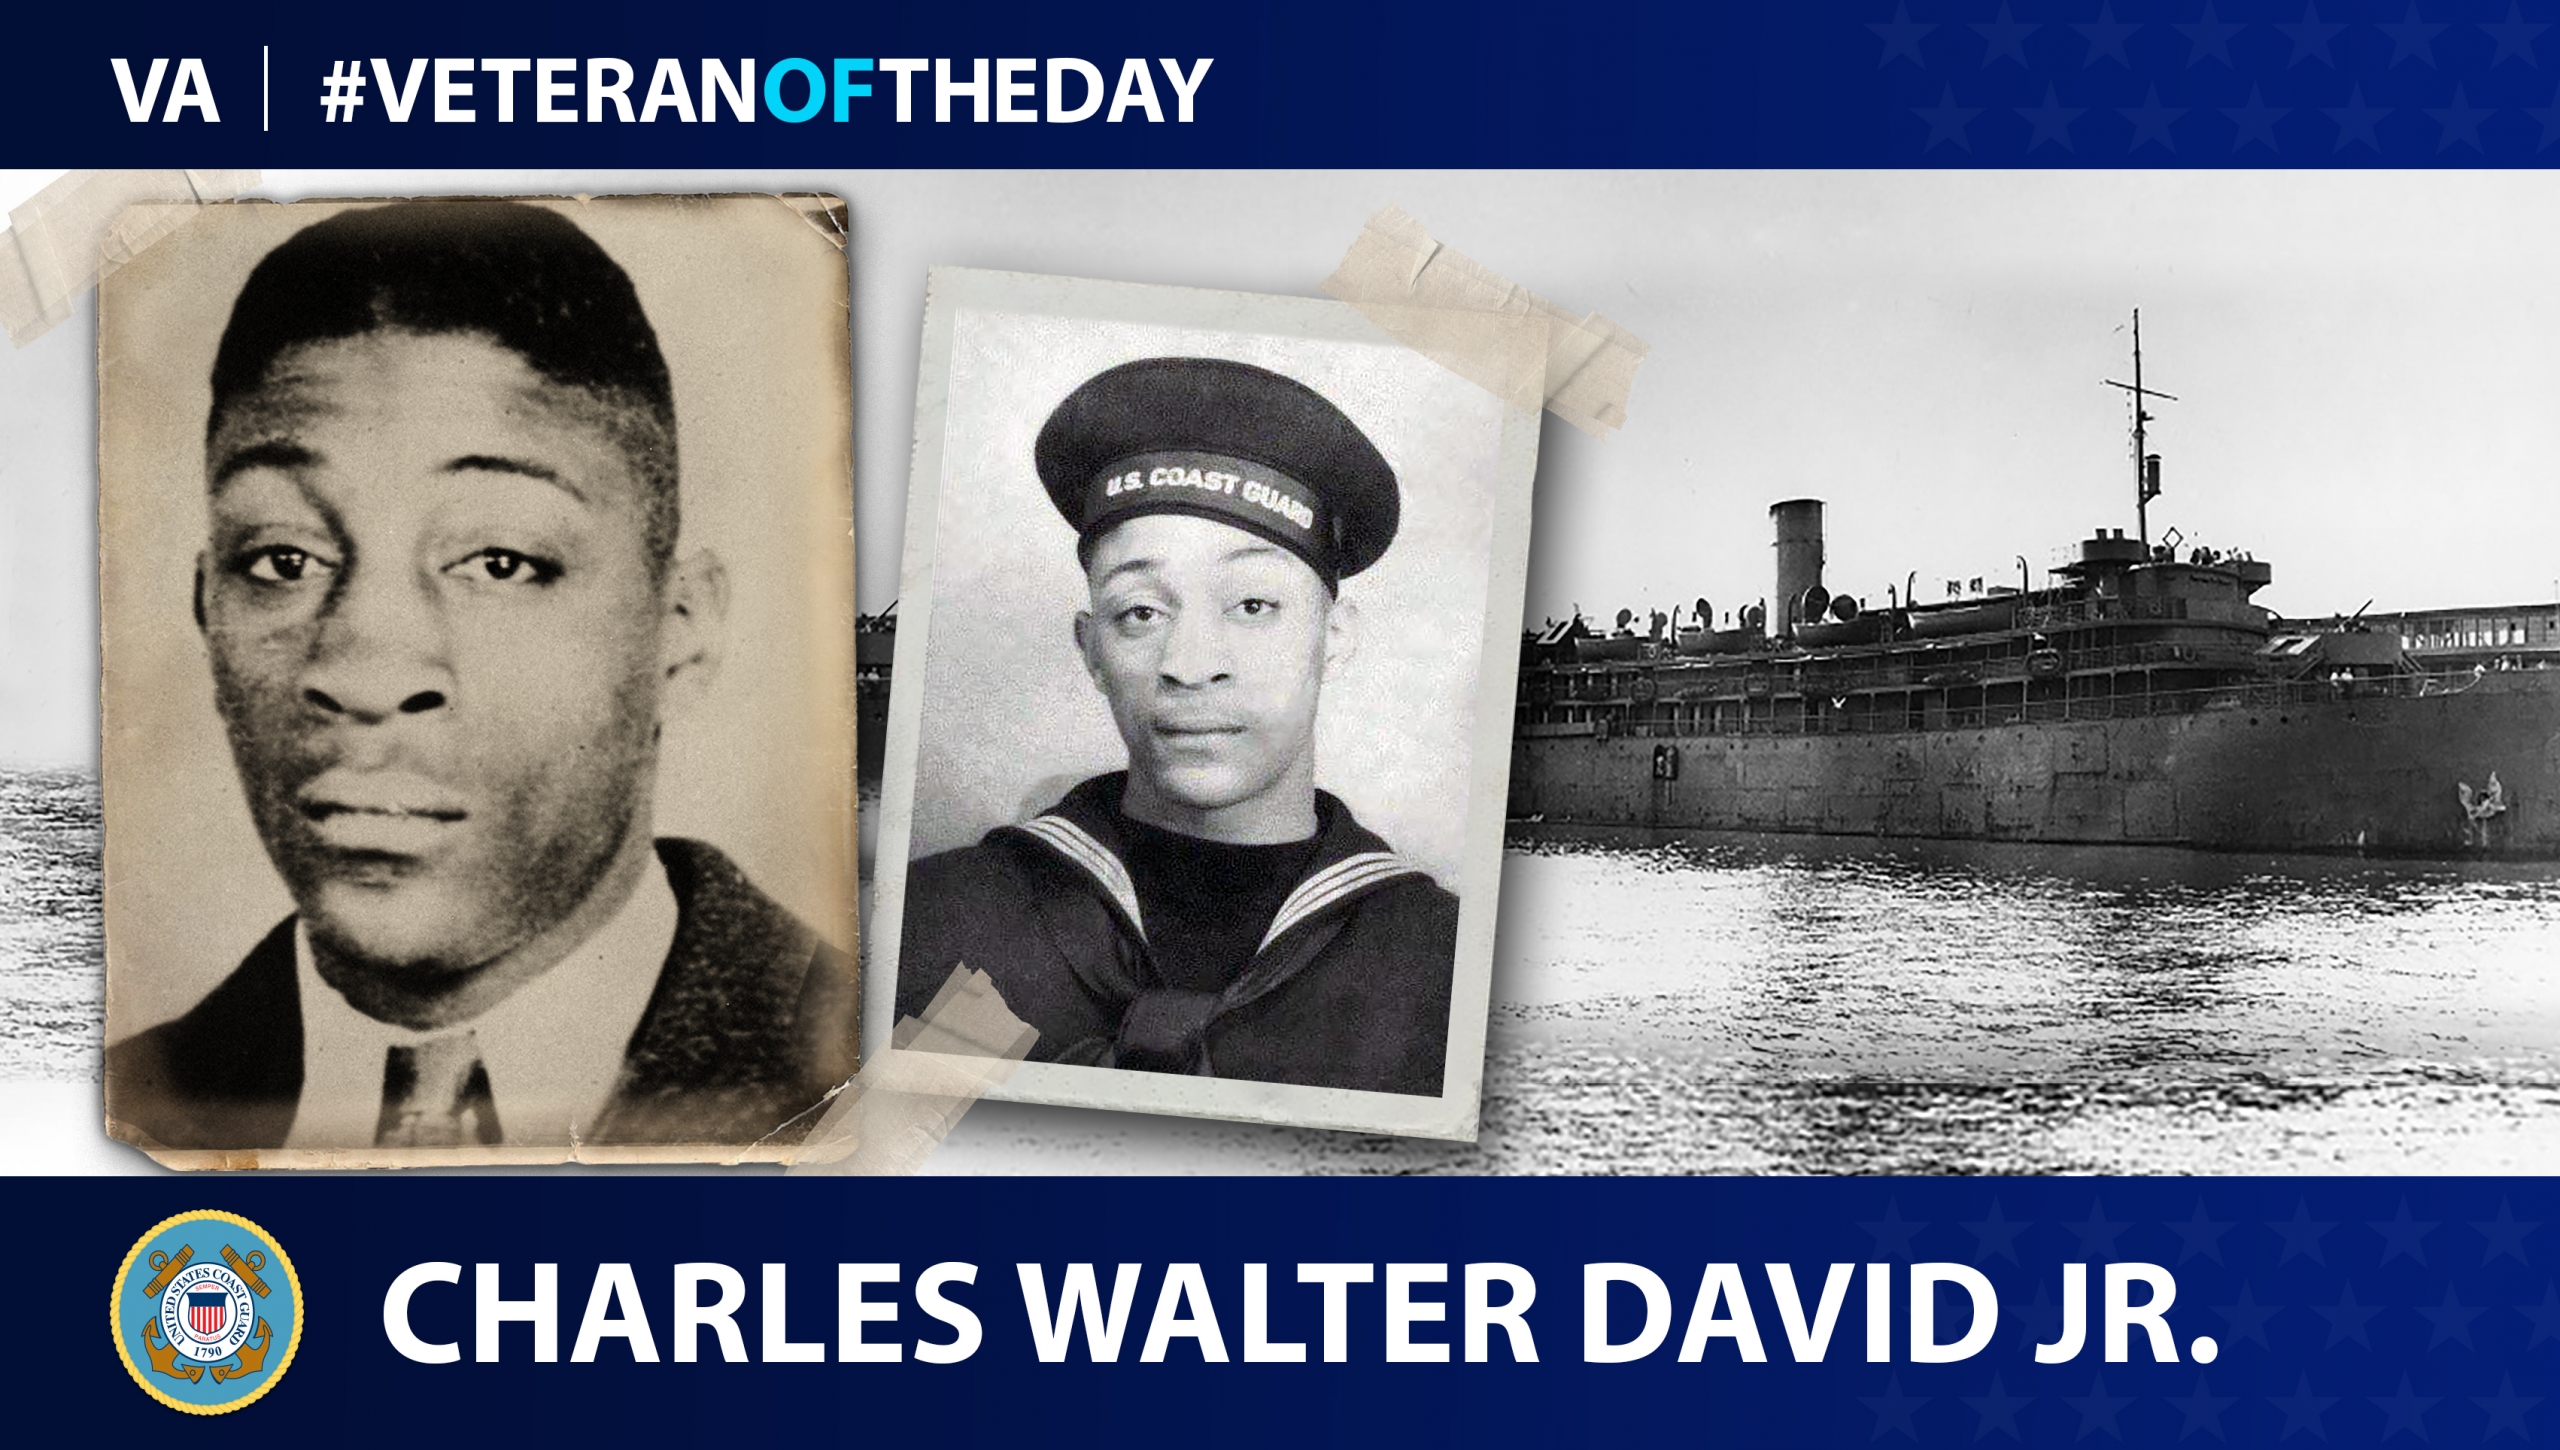 During Black History Month, today’s #VeteranOfTheDay is Coast Guard Veteran Charles Walter David Jr., a World War II rescuer.